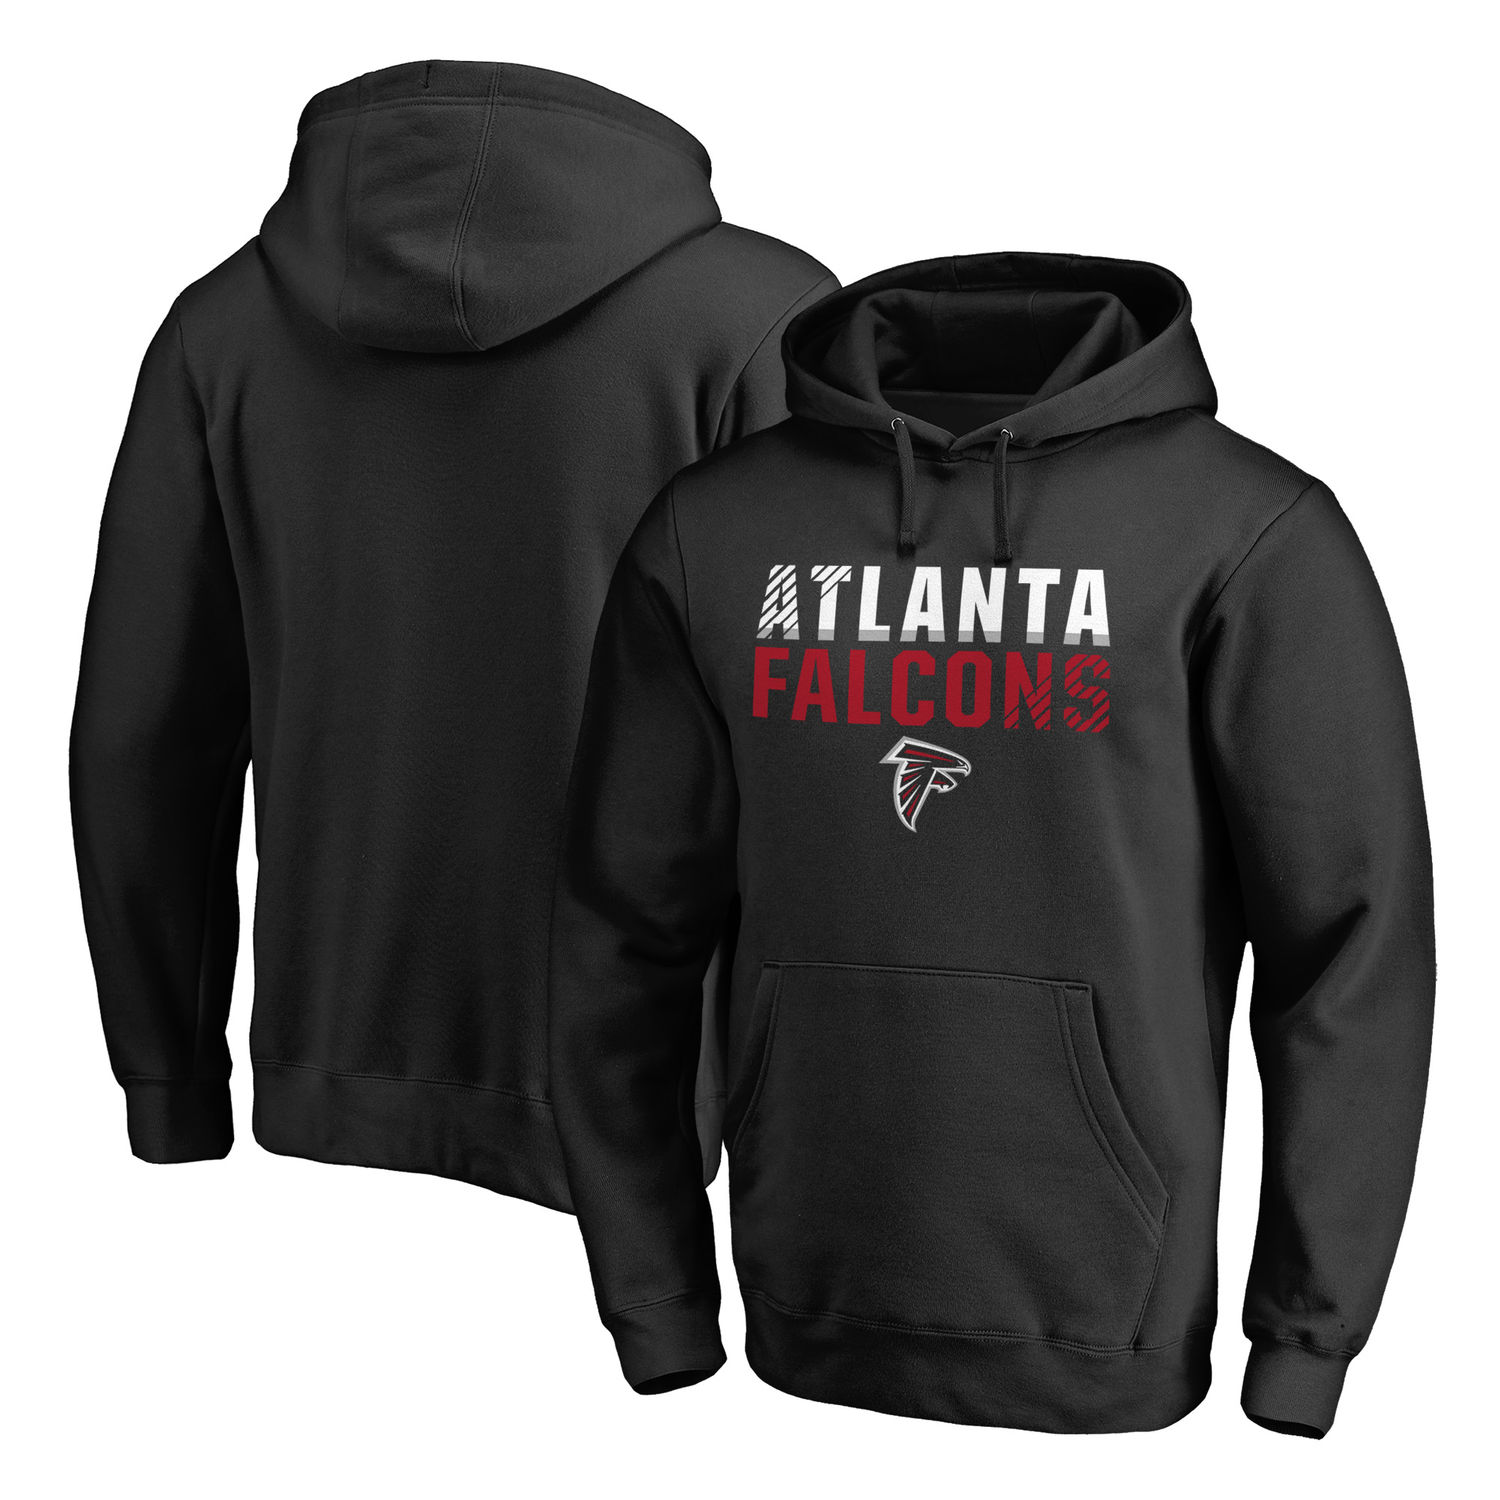 Men's Atlanta Falcons NFL Pro Line by Fanatics Branded Black Iconic Collection Fade Out Pullover Hoodie